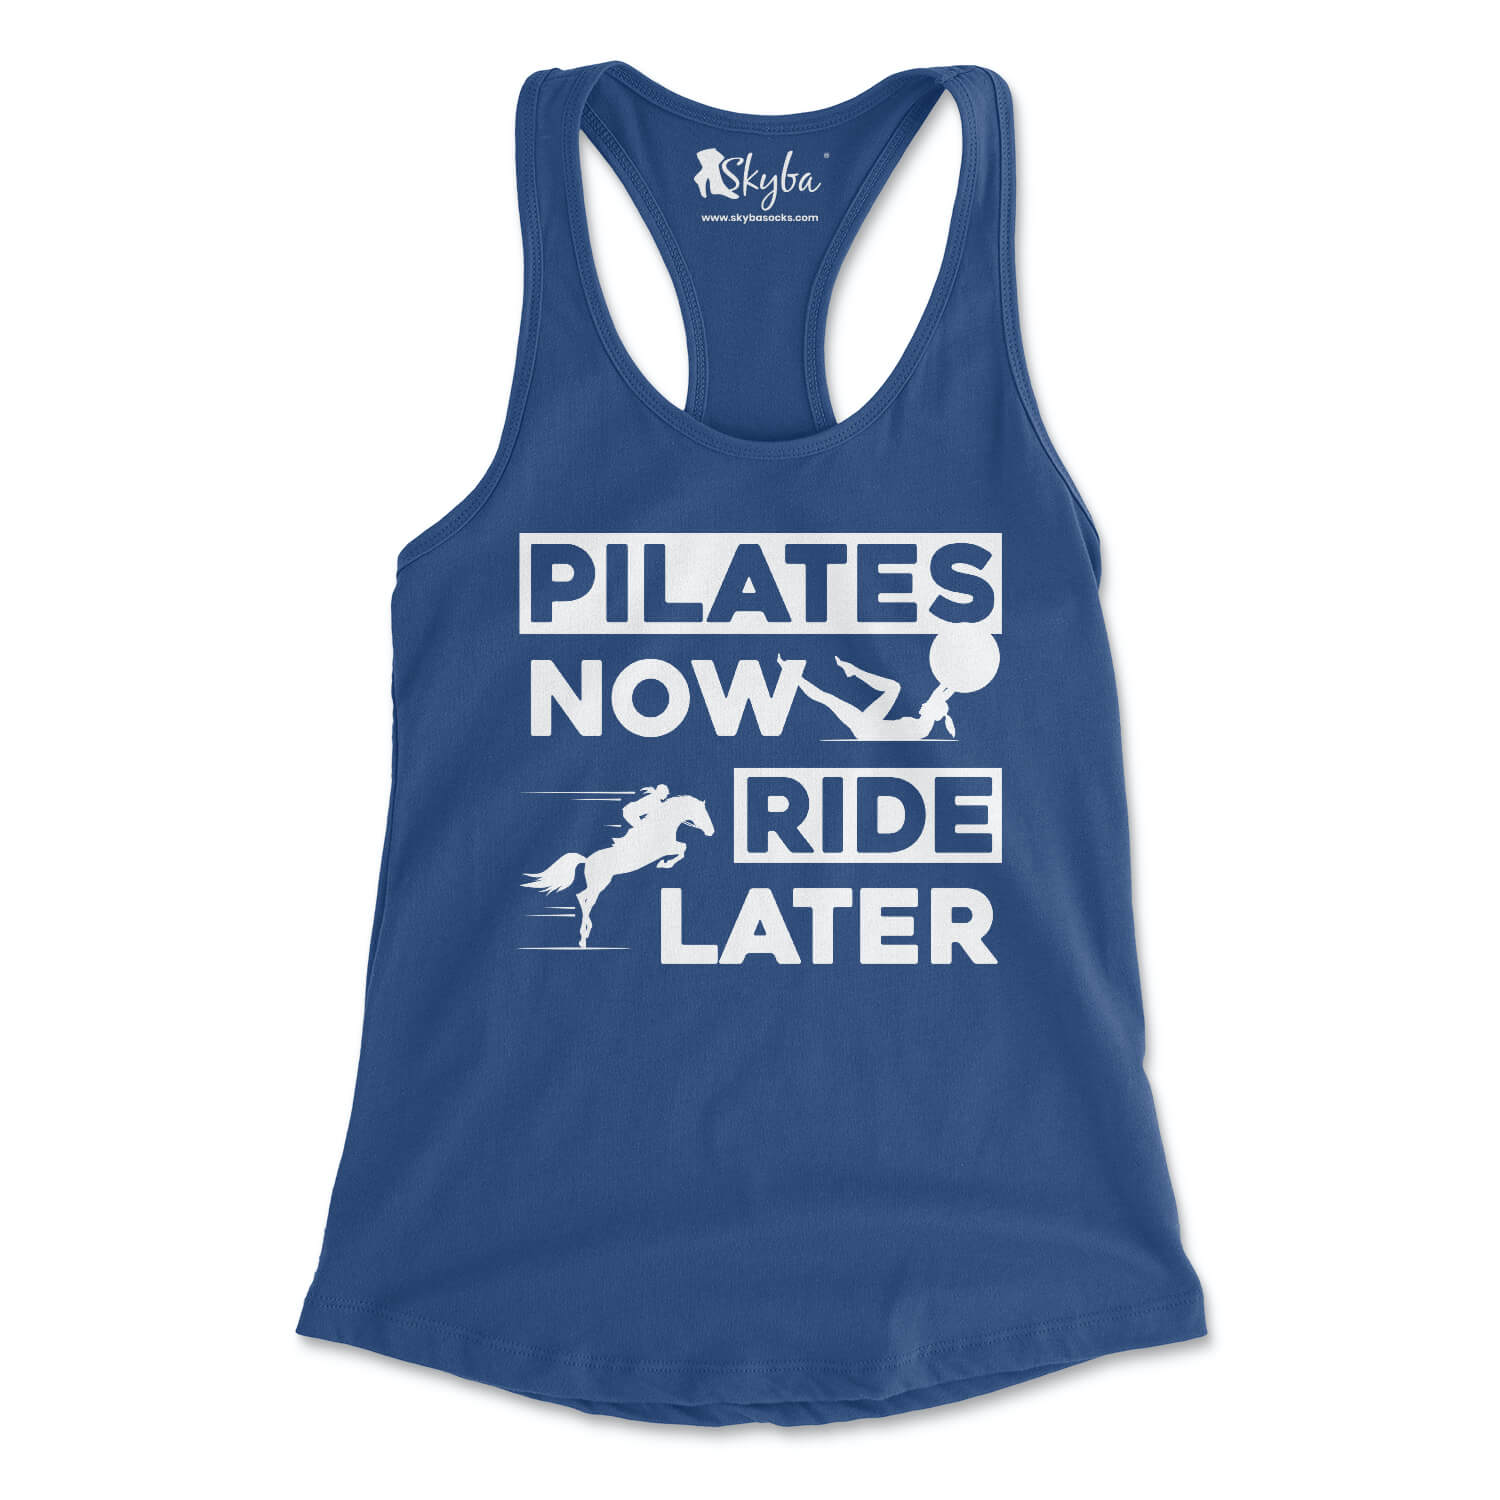 Pilates Now Ride Later - Women's Slim Fit Tank Skyba Tank Top